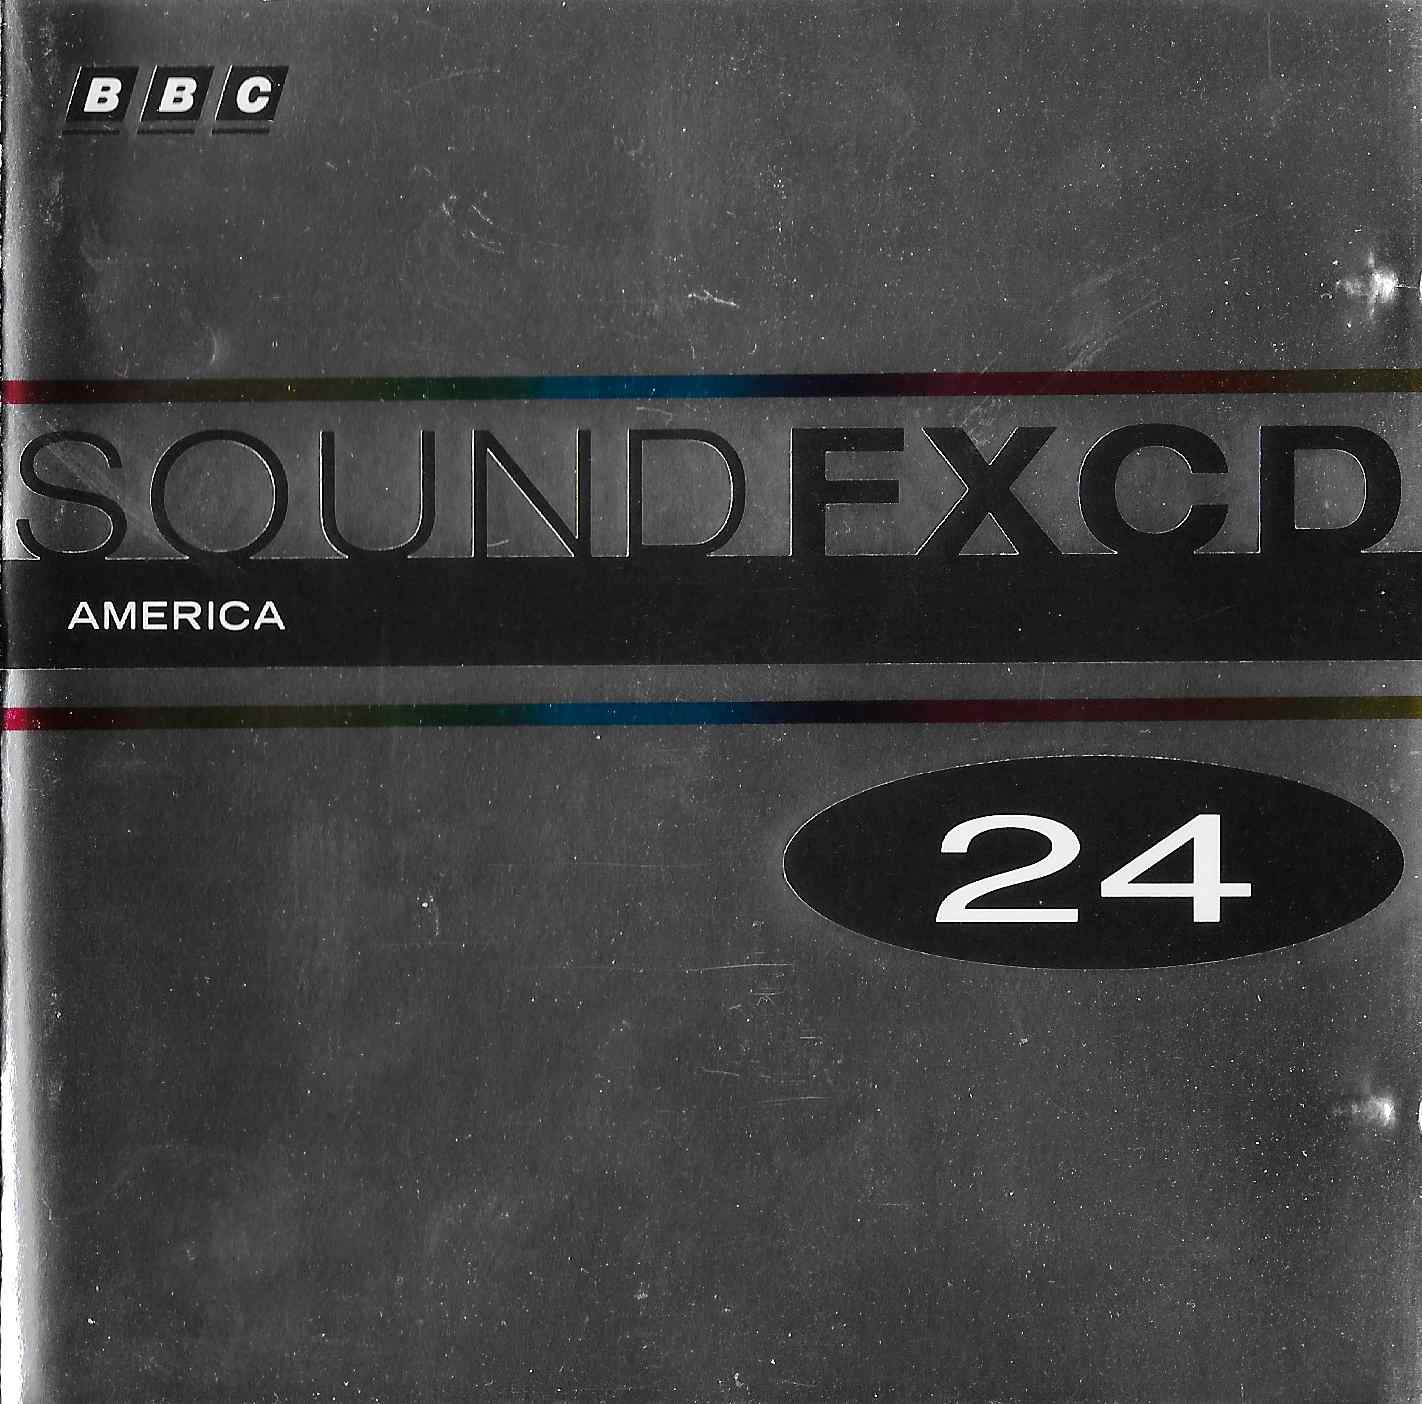 Picture of BBCCD SFX024 America by artist Various from the BBC cds - Records and Tapes library